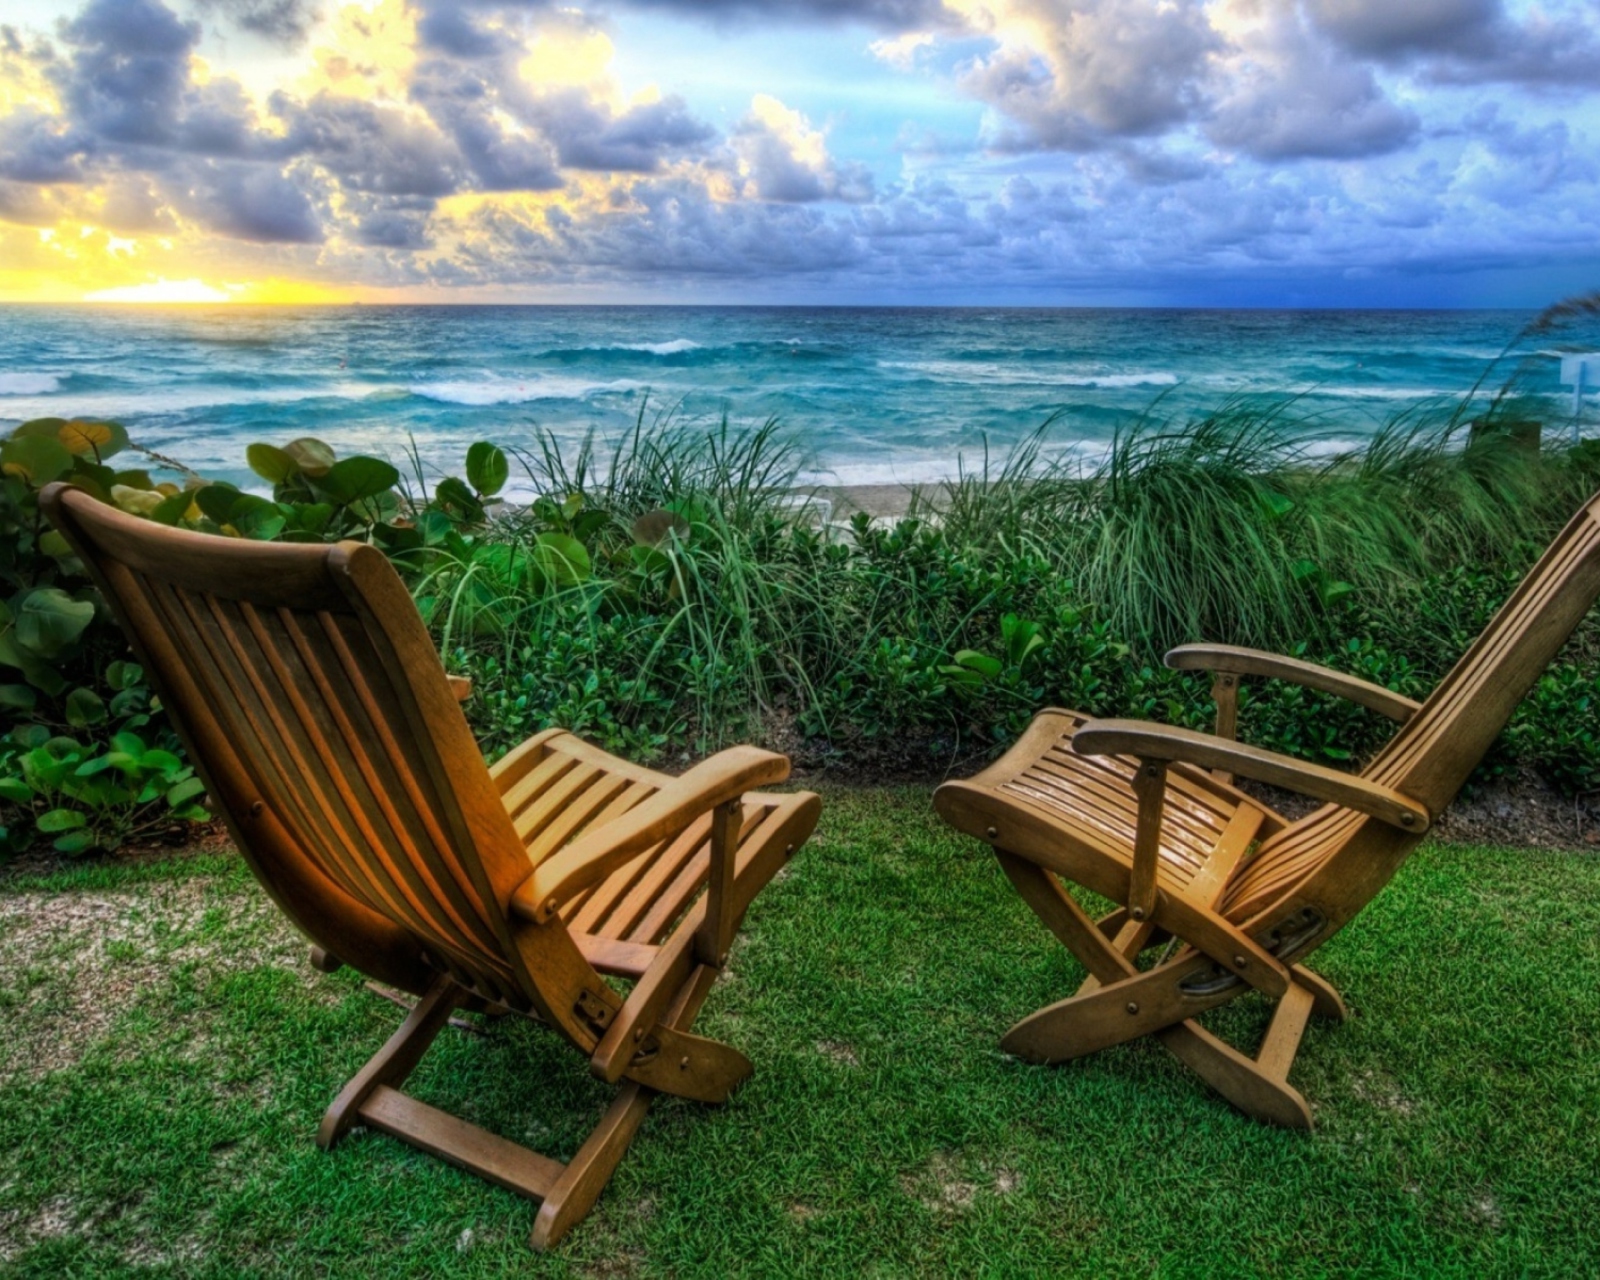 Chairs With Sea View wallpaper 1600x1280